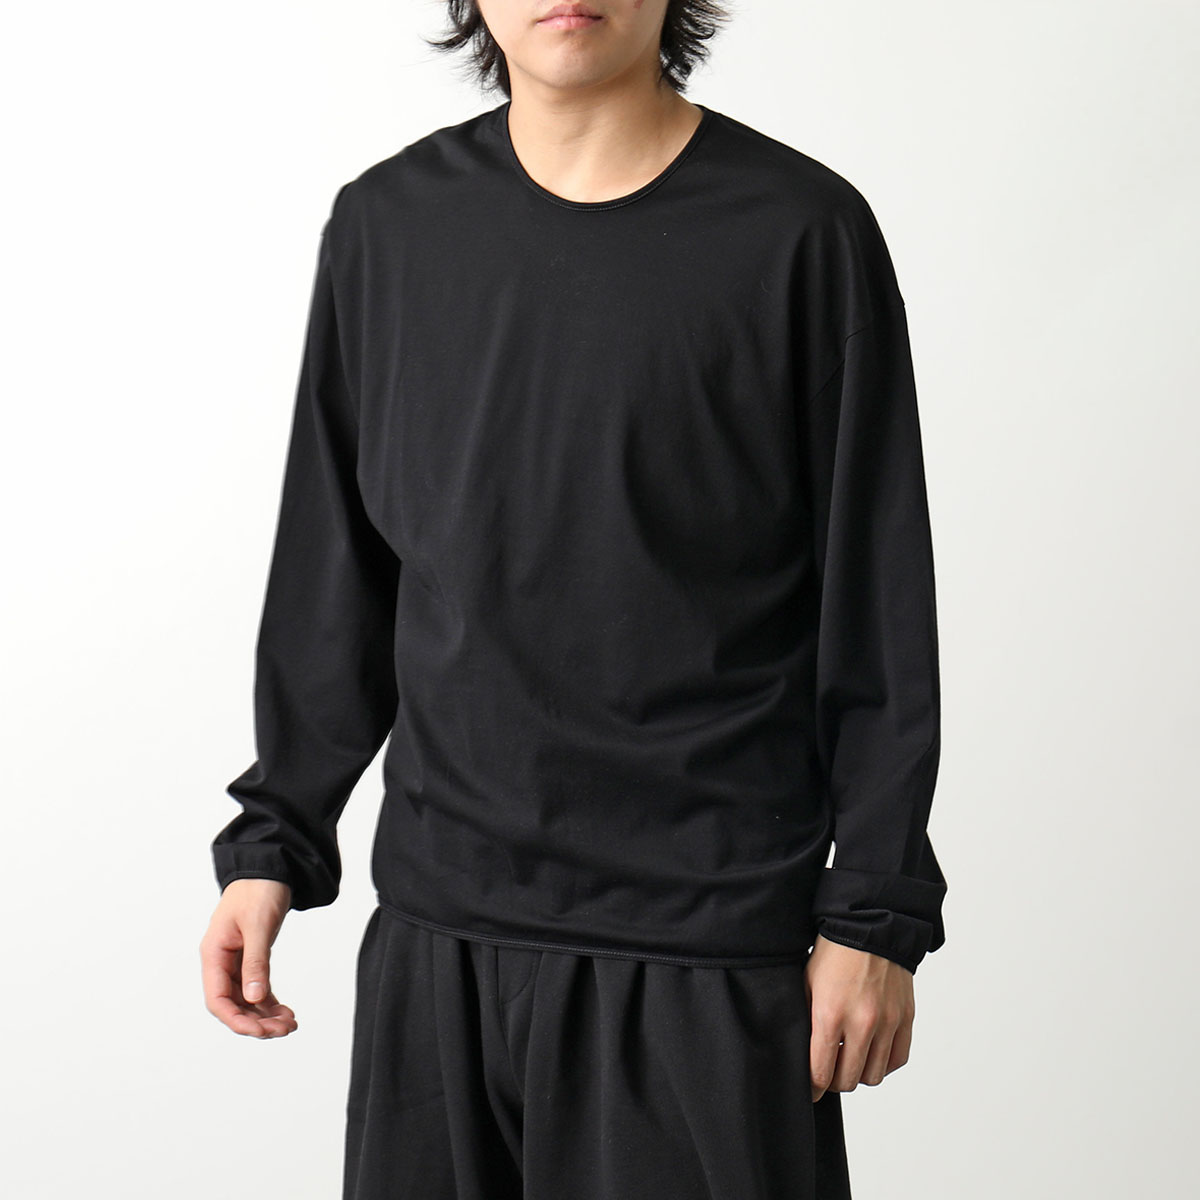 Lemaire ルメール Tシャツ LS RELAXED TEE TO1182 LJ1018 メンズ 長袖 カットソー クルーネック コットン カラー2色｜s-musee｜02